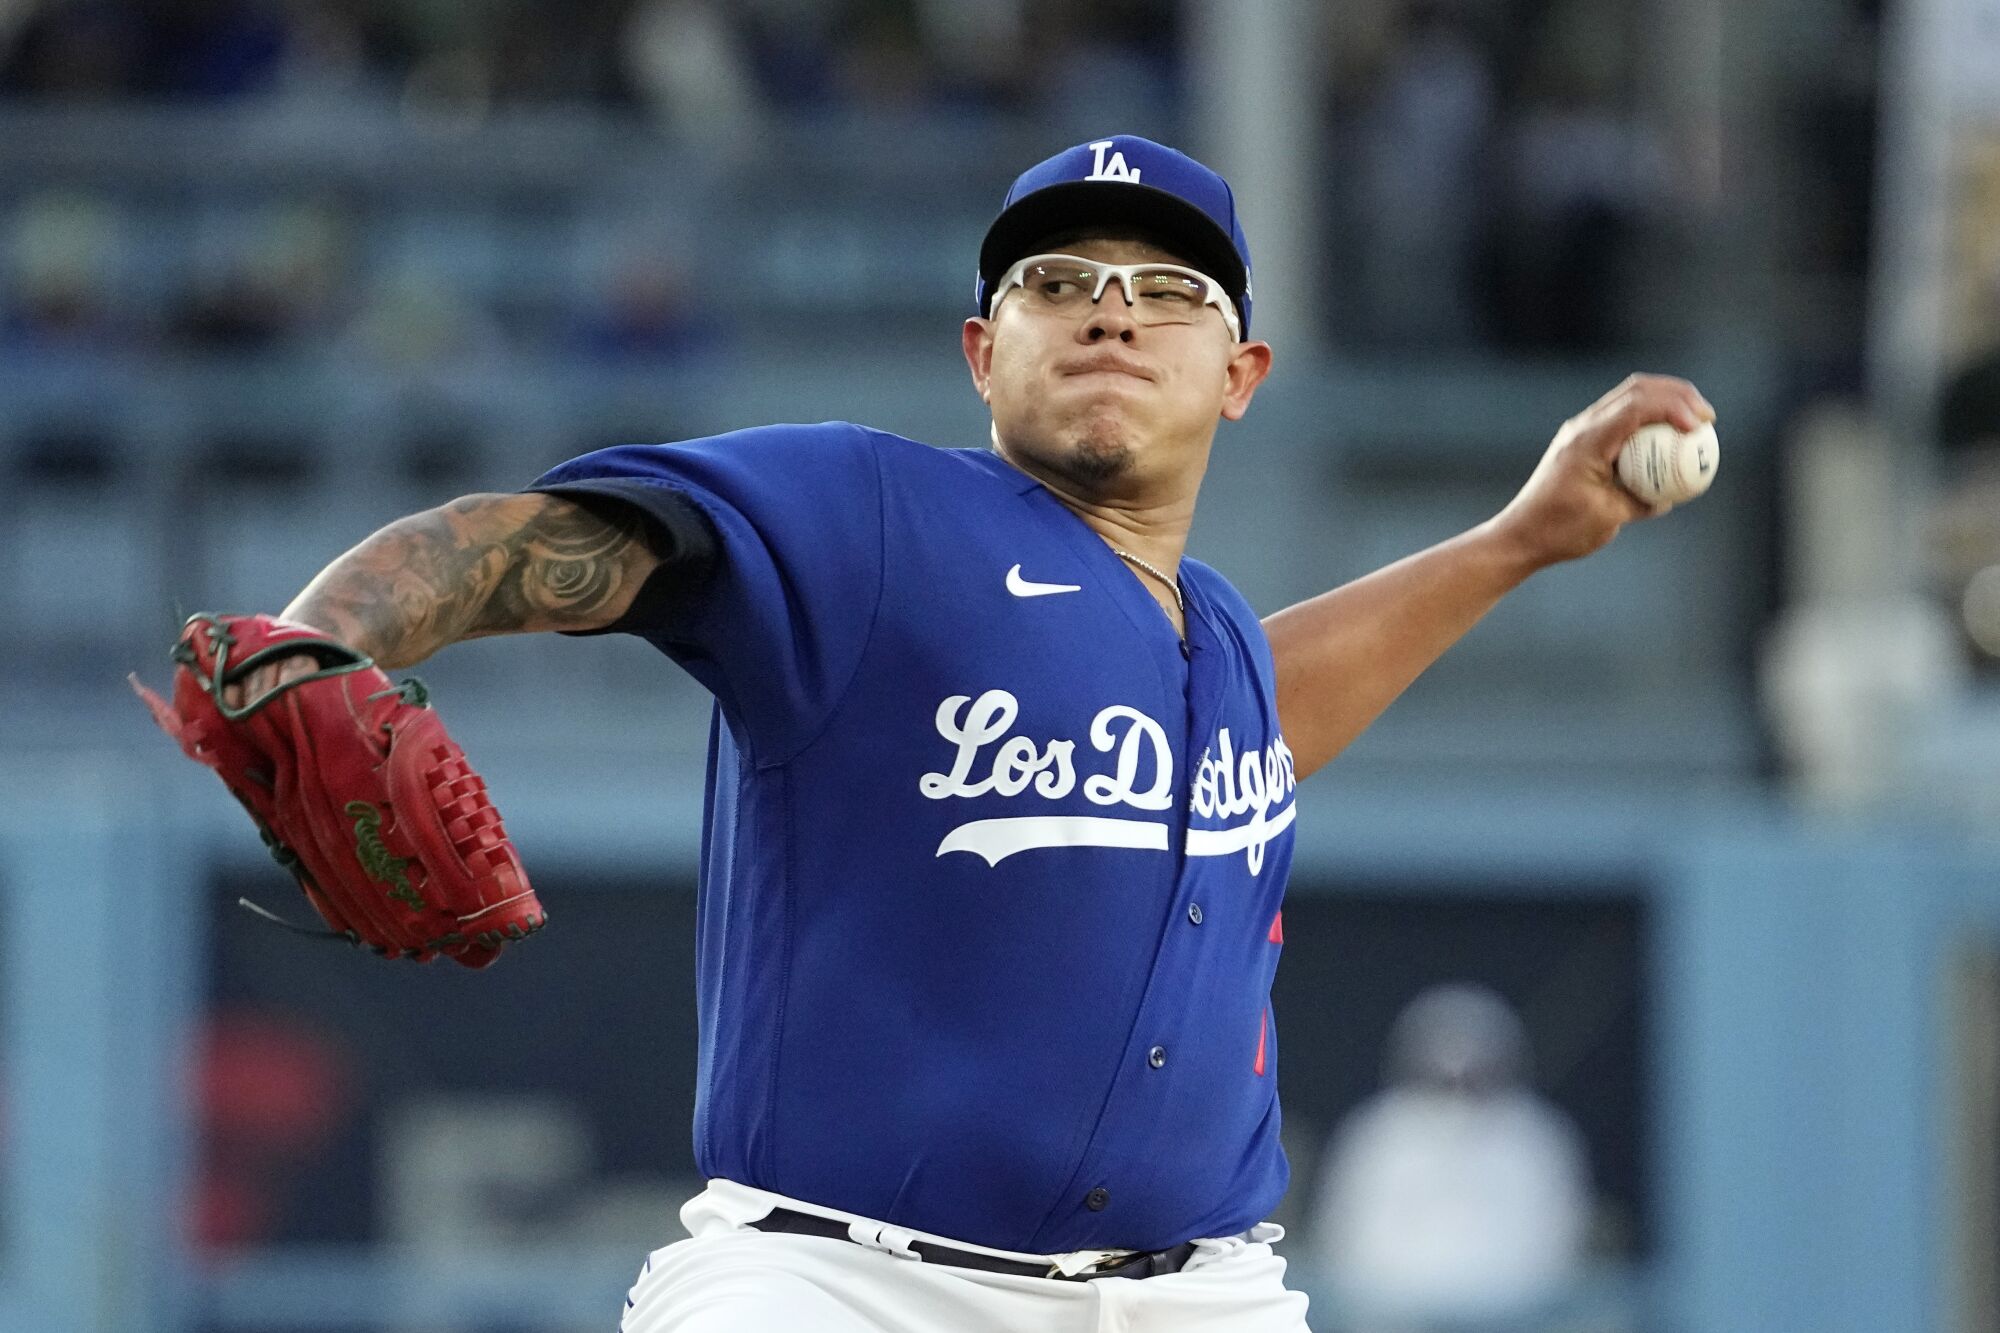 Julio Urías gave up only one hit and struck out 10 in seven innings Tuesday night.